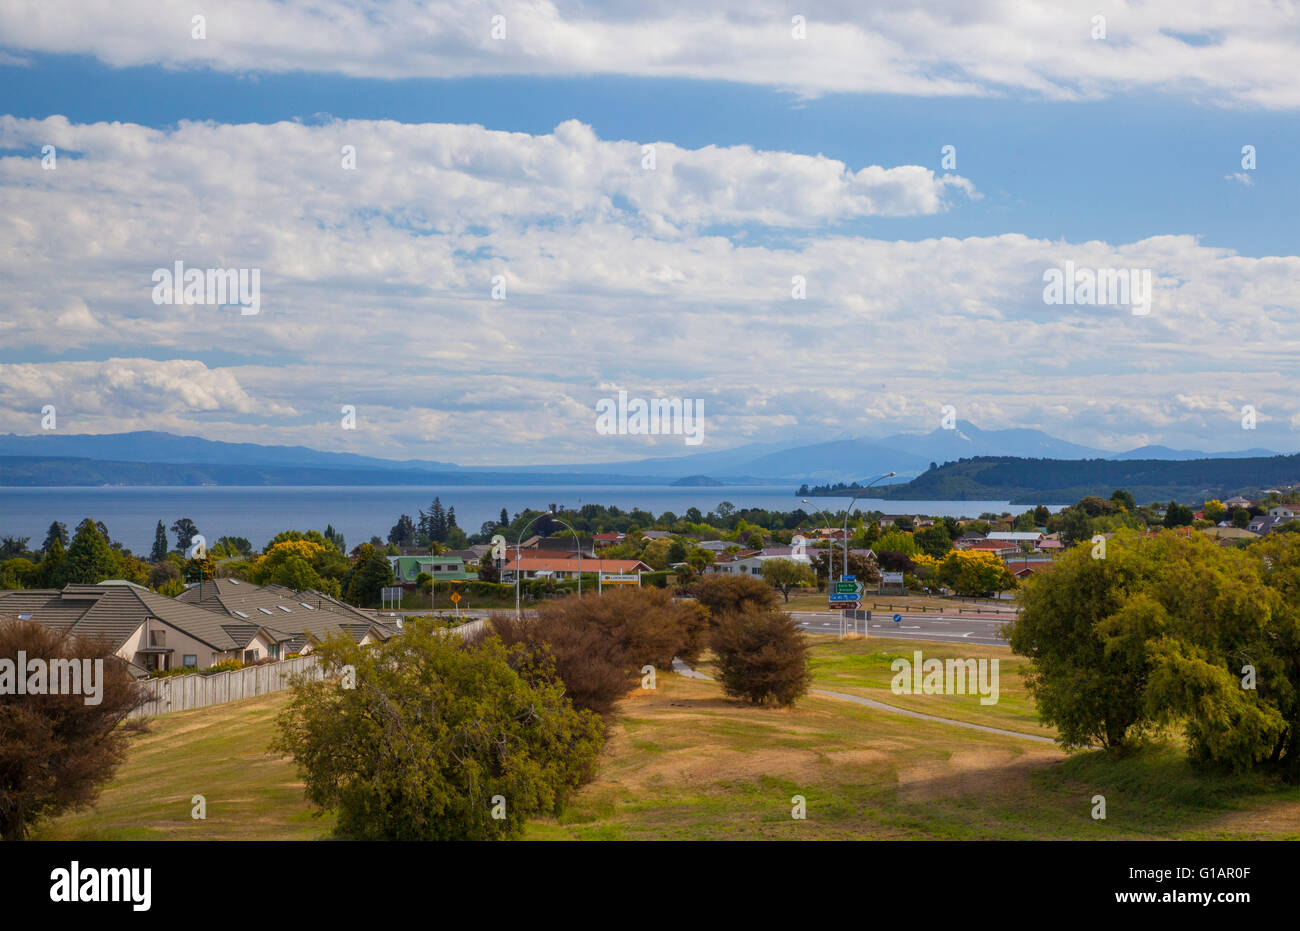 View of Lake Taupo area of New Zealand Stock Photo